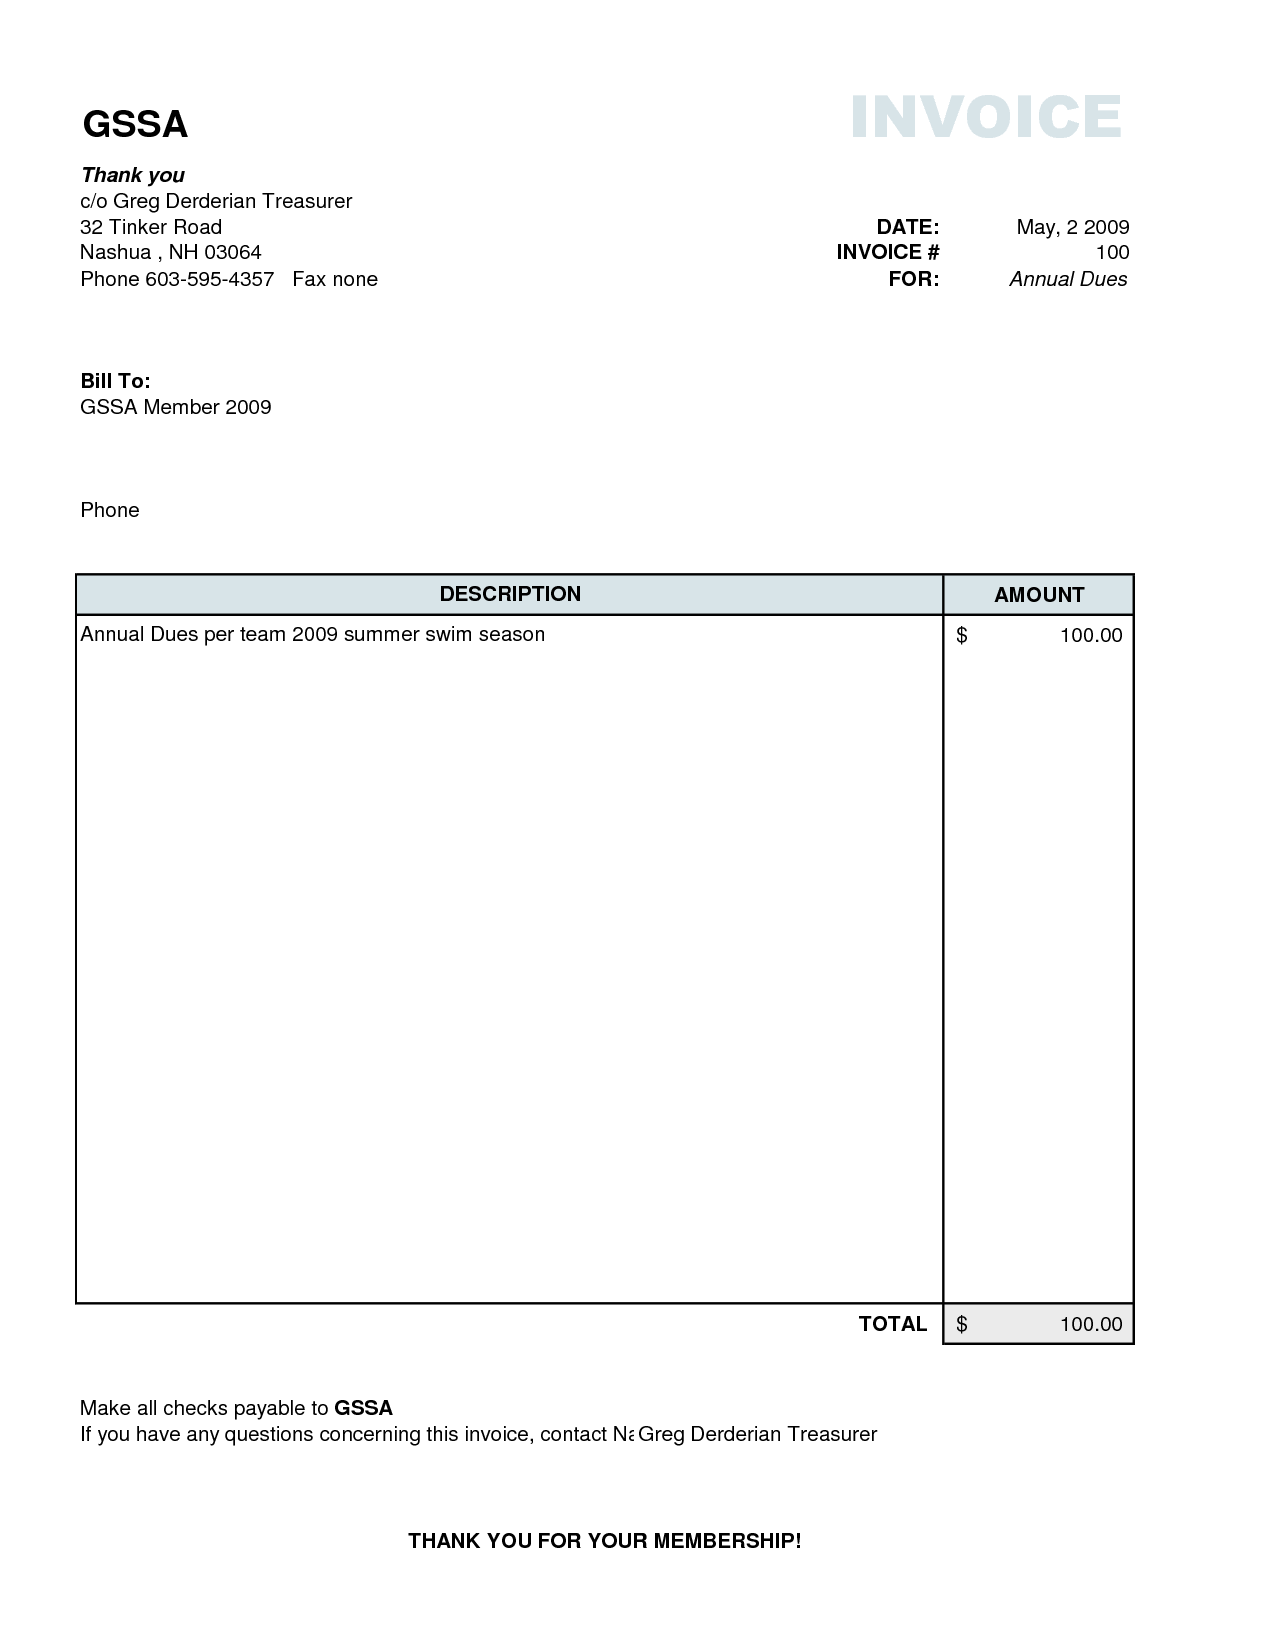 Blank invoice template, simple excel invoice templates | 8ws 